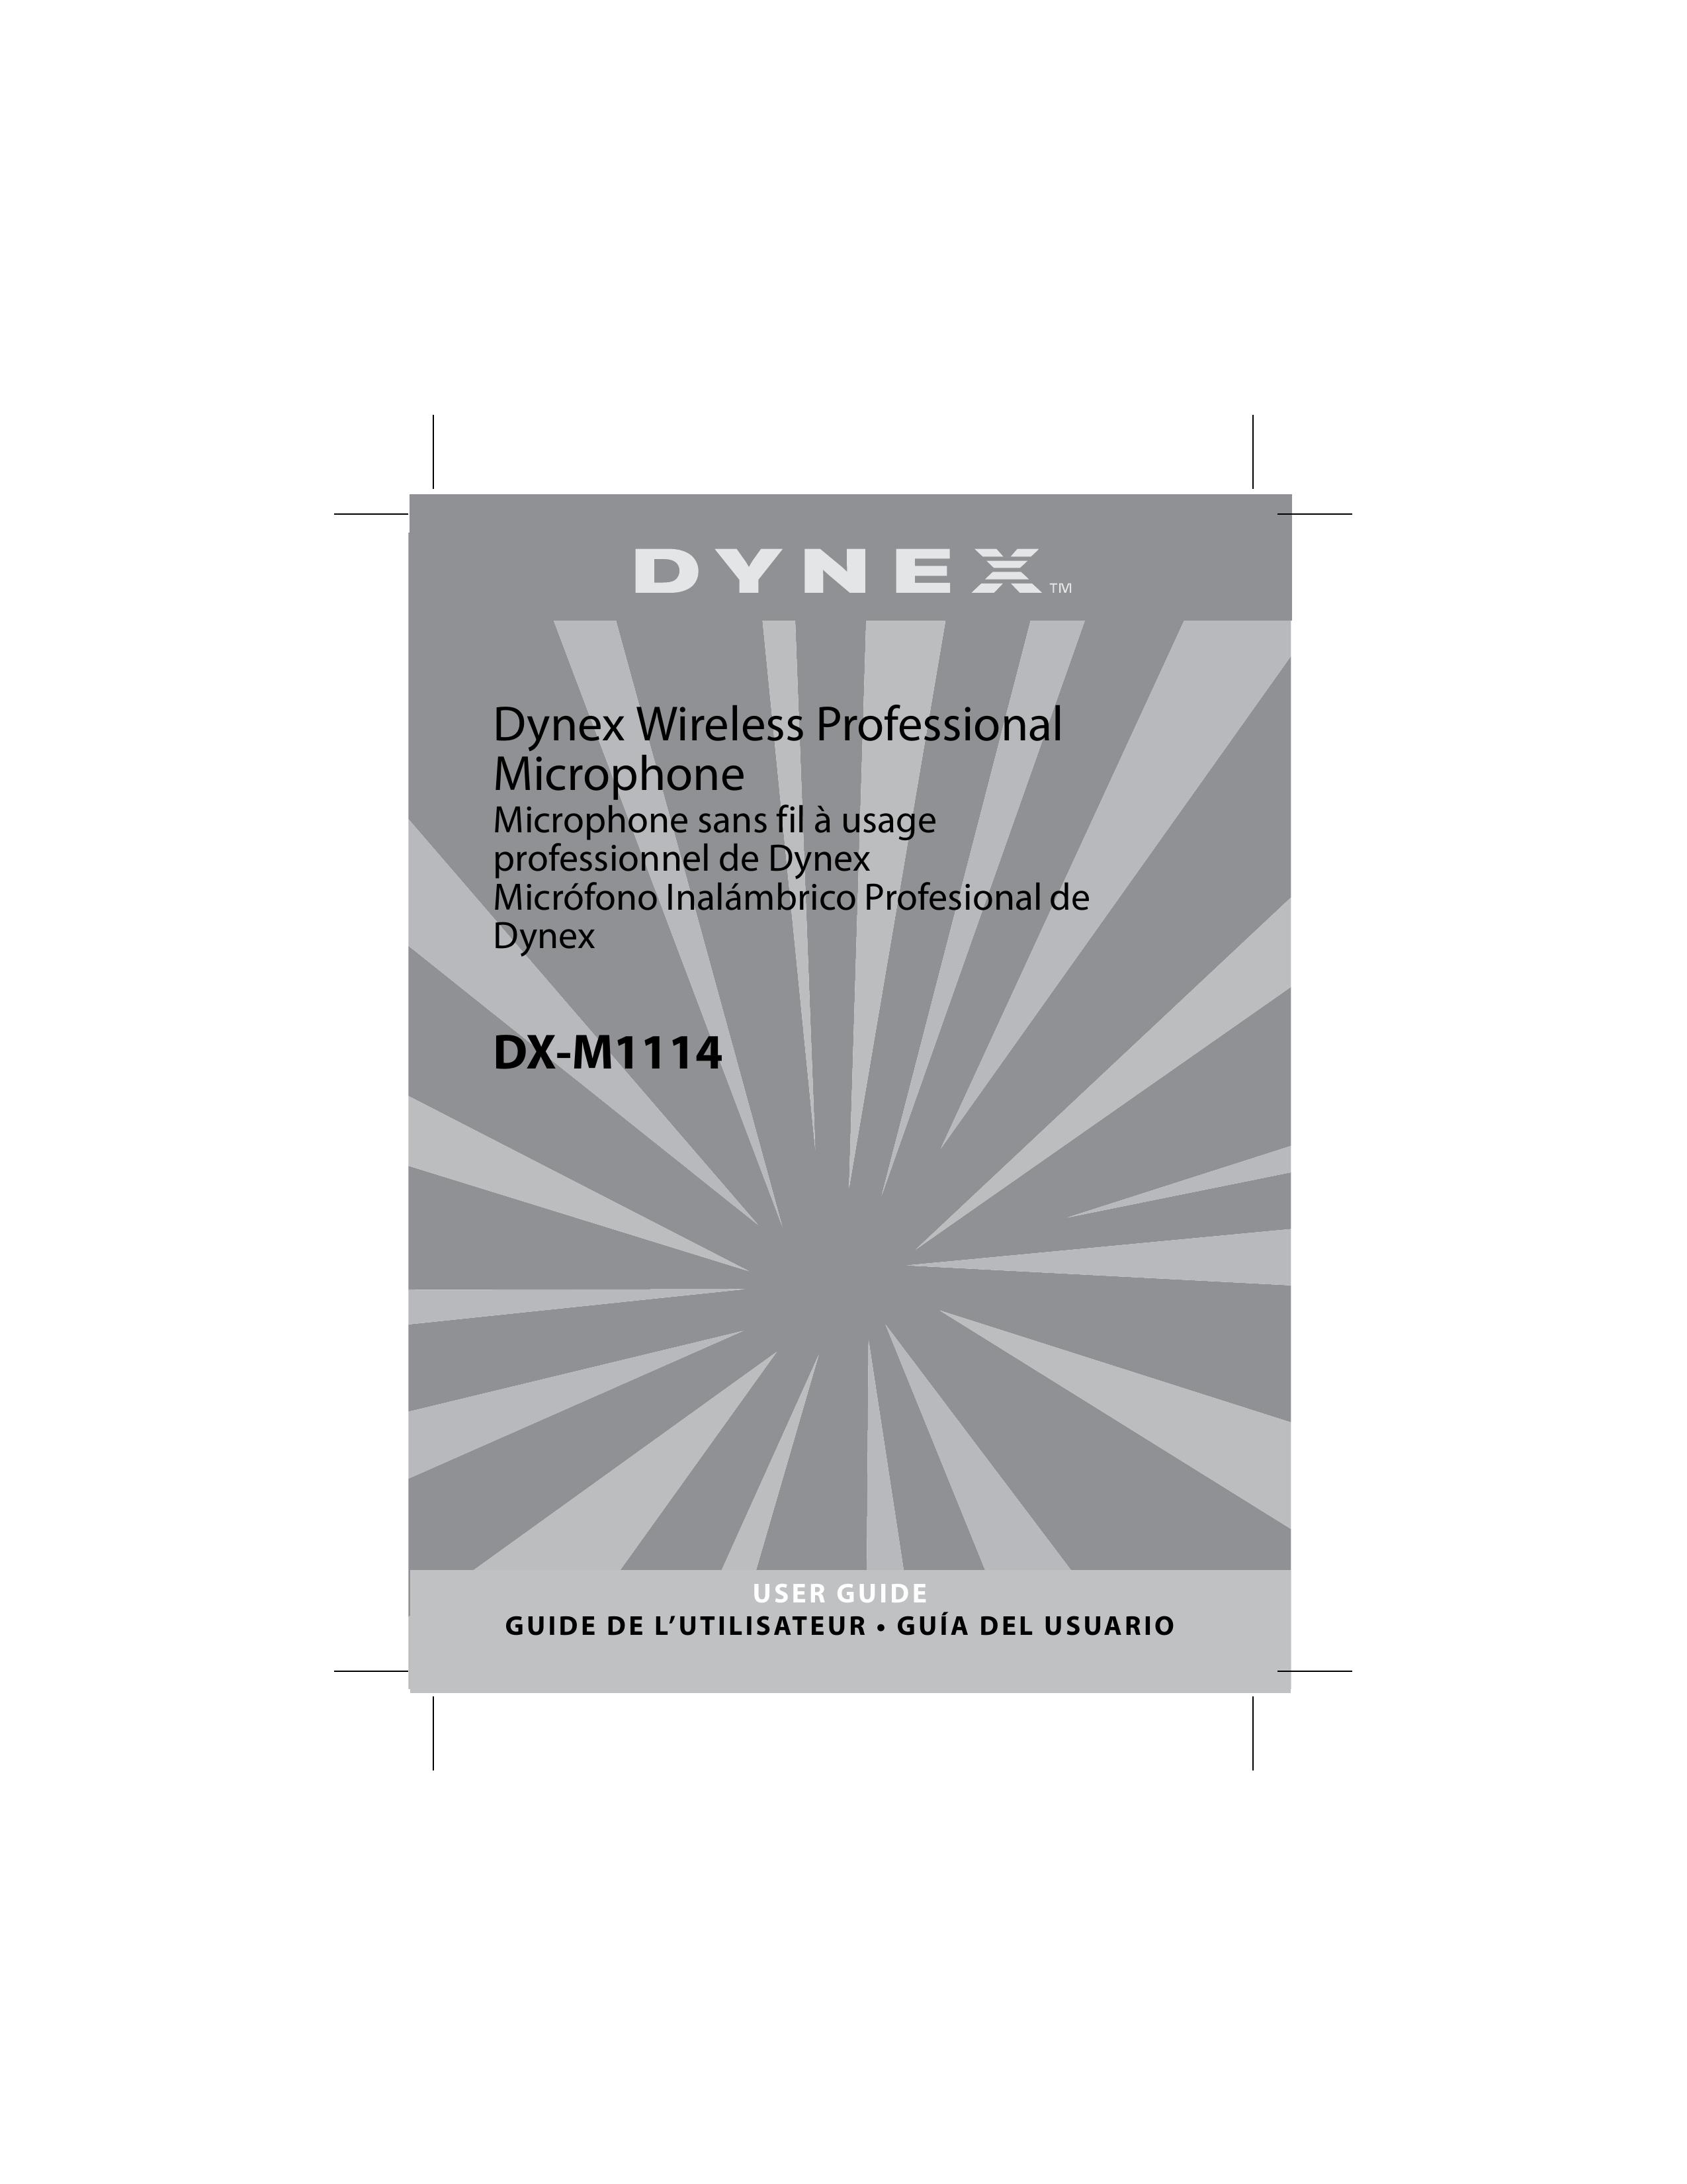 Dynex DX-M1114 Microphone User Manual (Page 1)